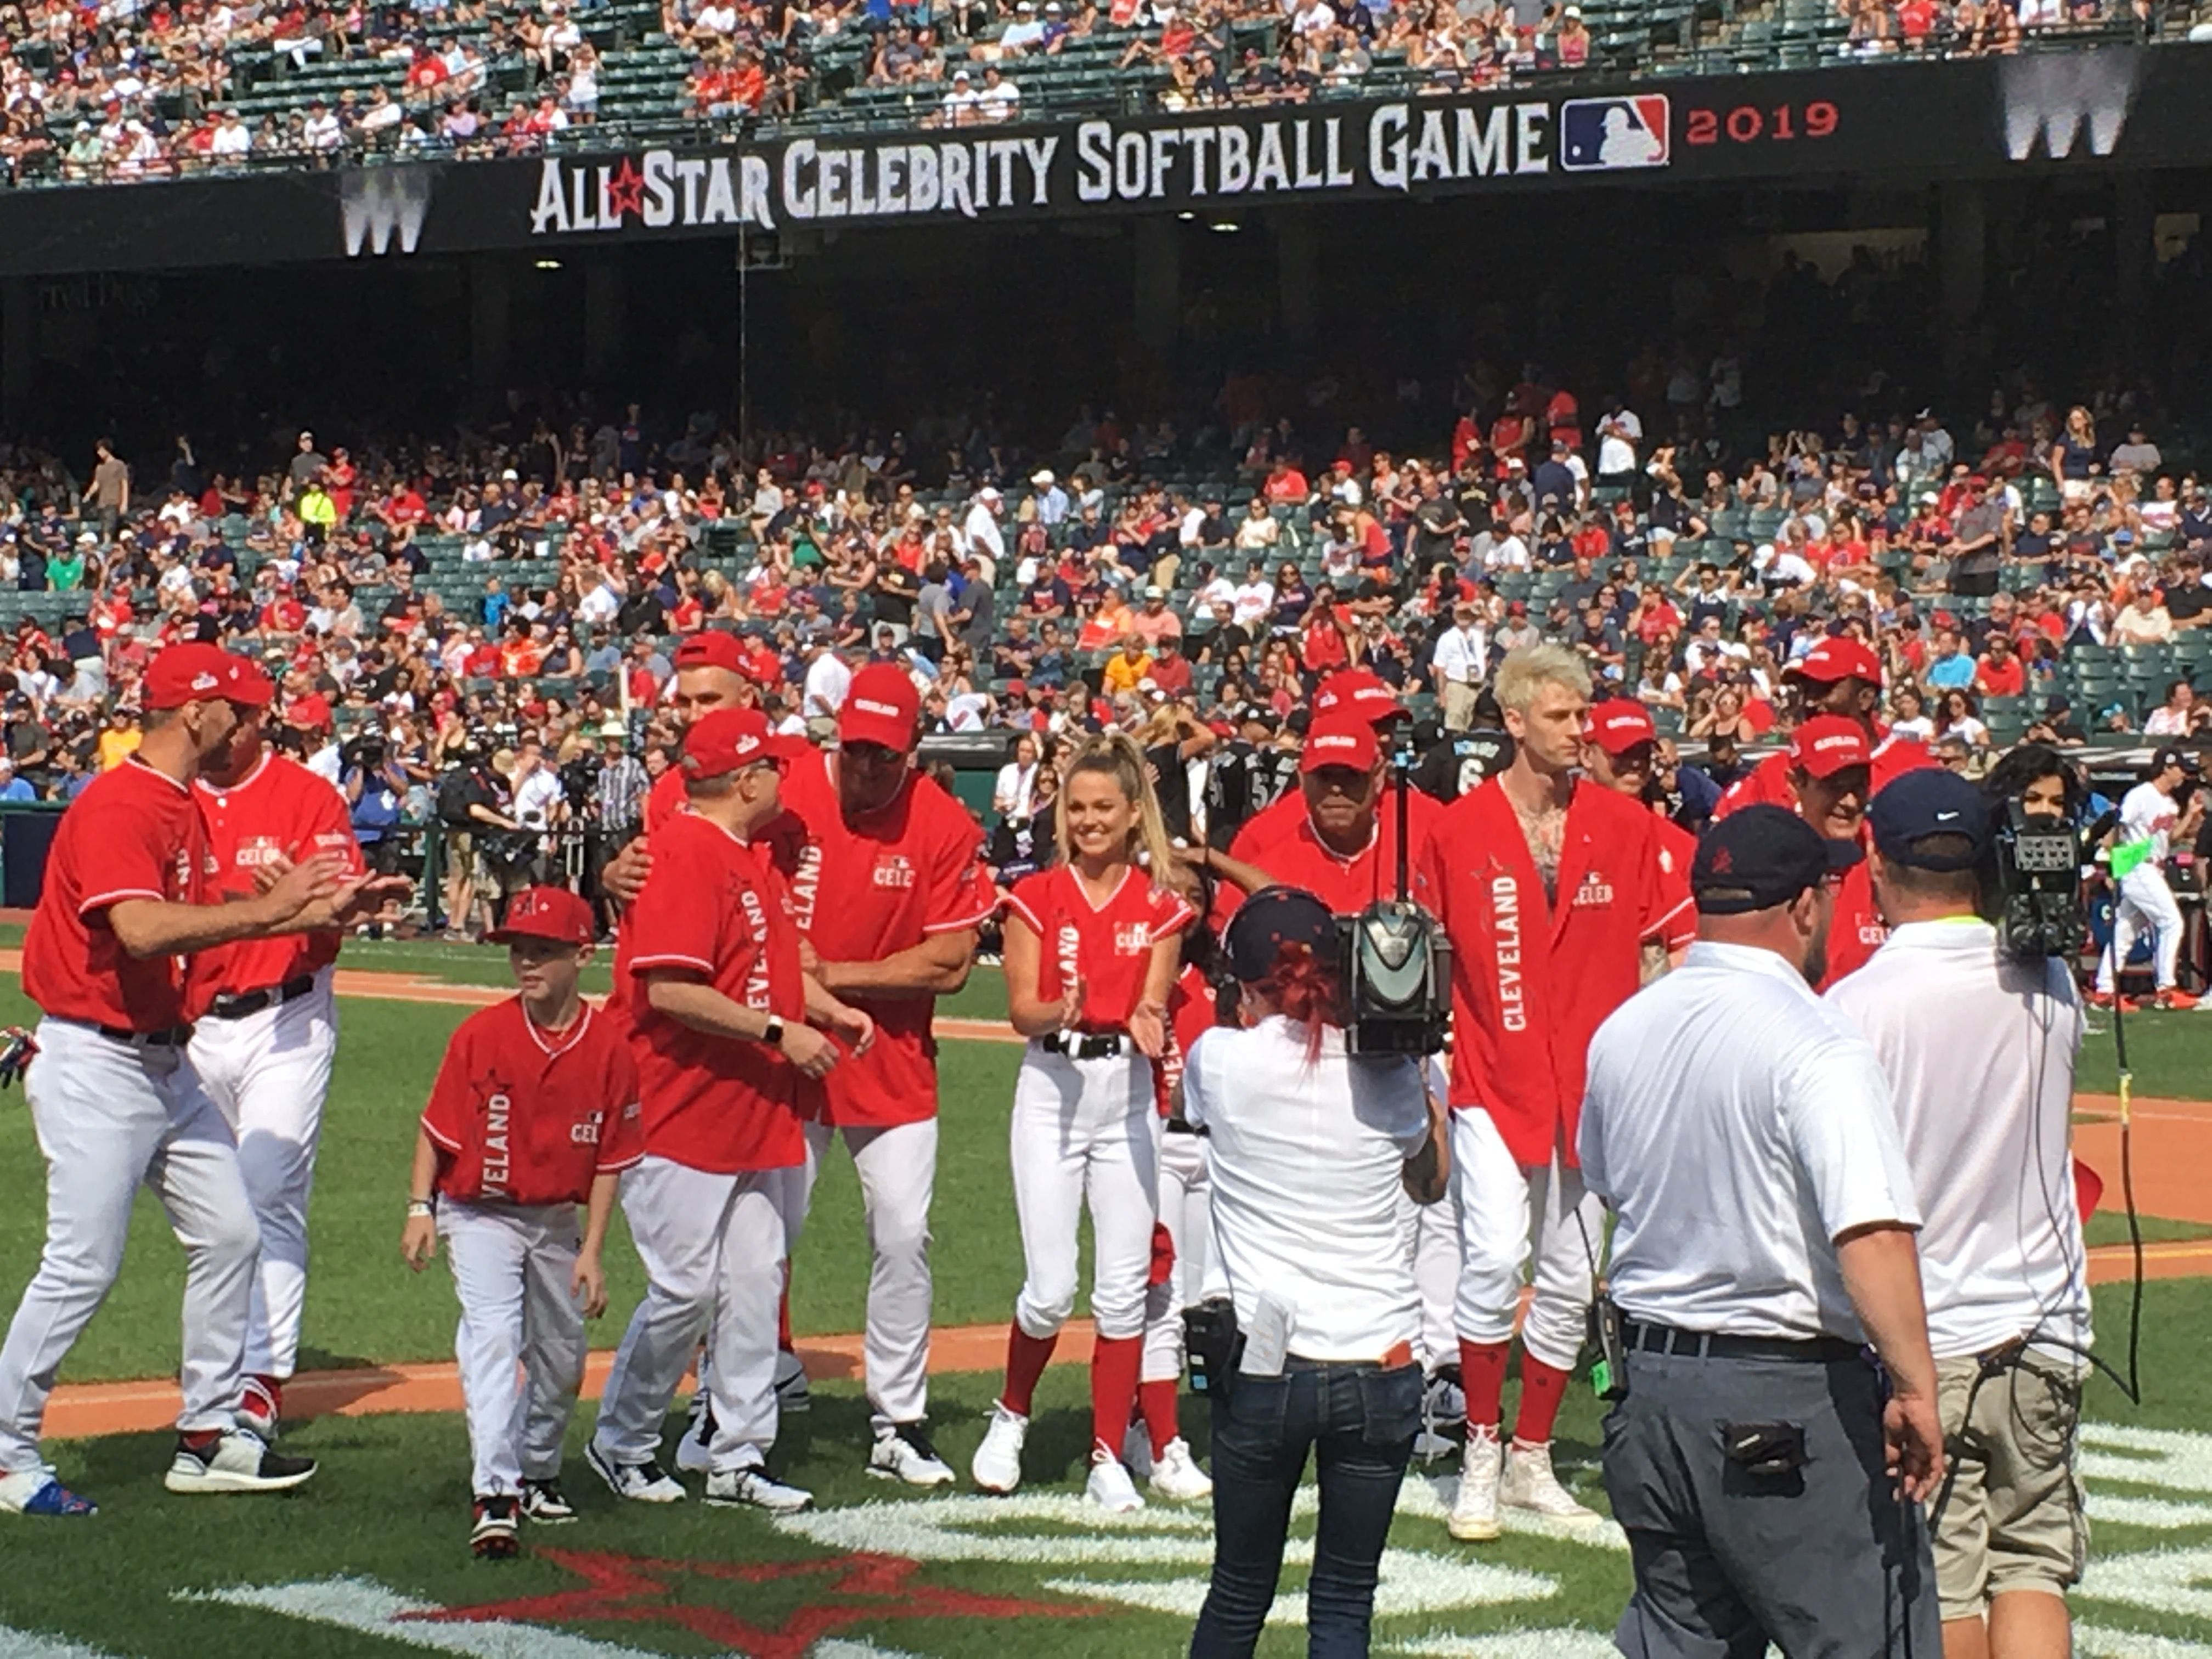 11 memorable moments from MLB All-Star Celebrity Softball Game 